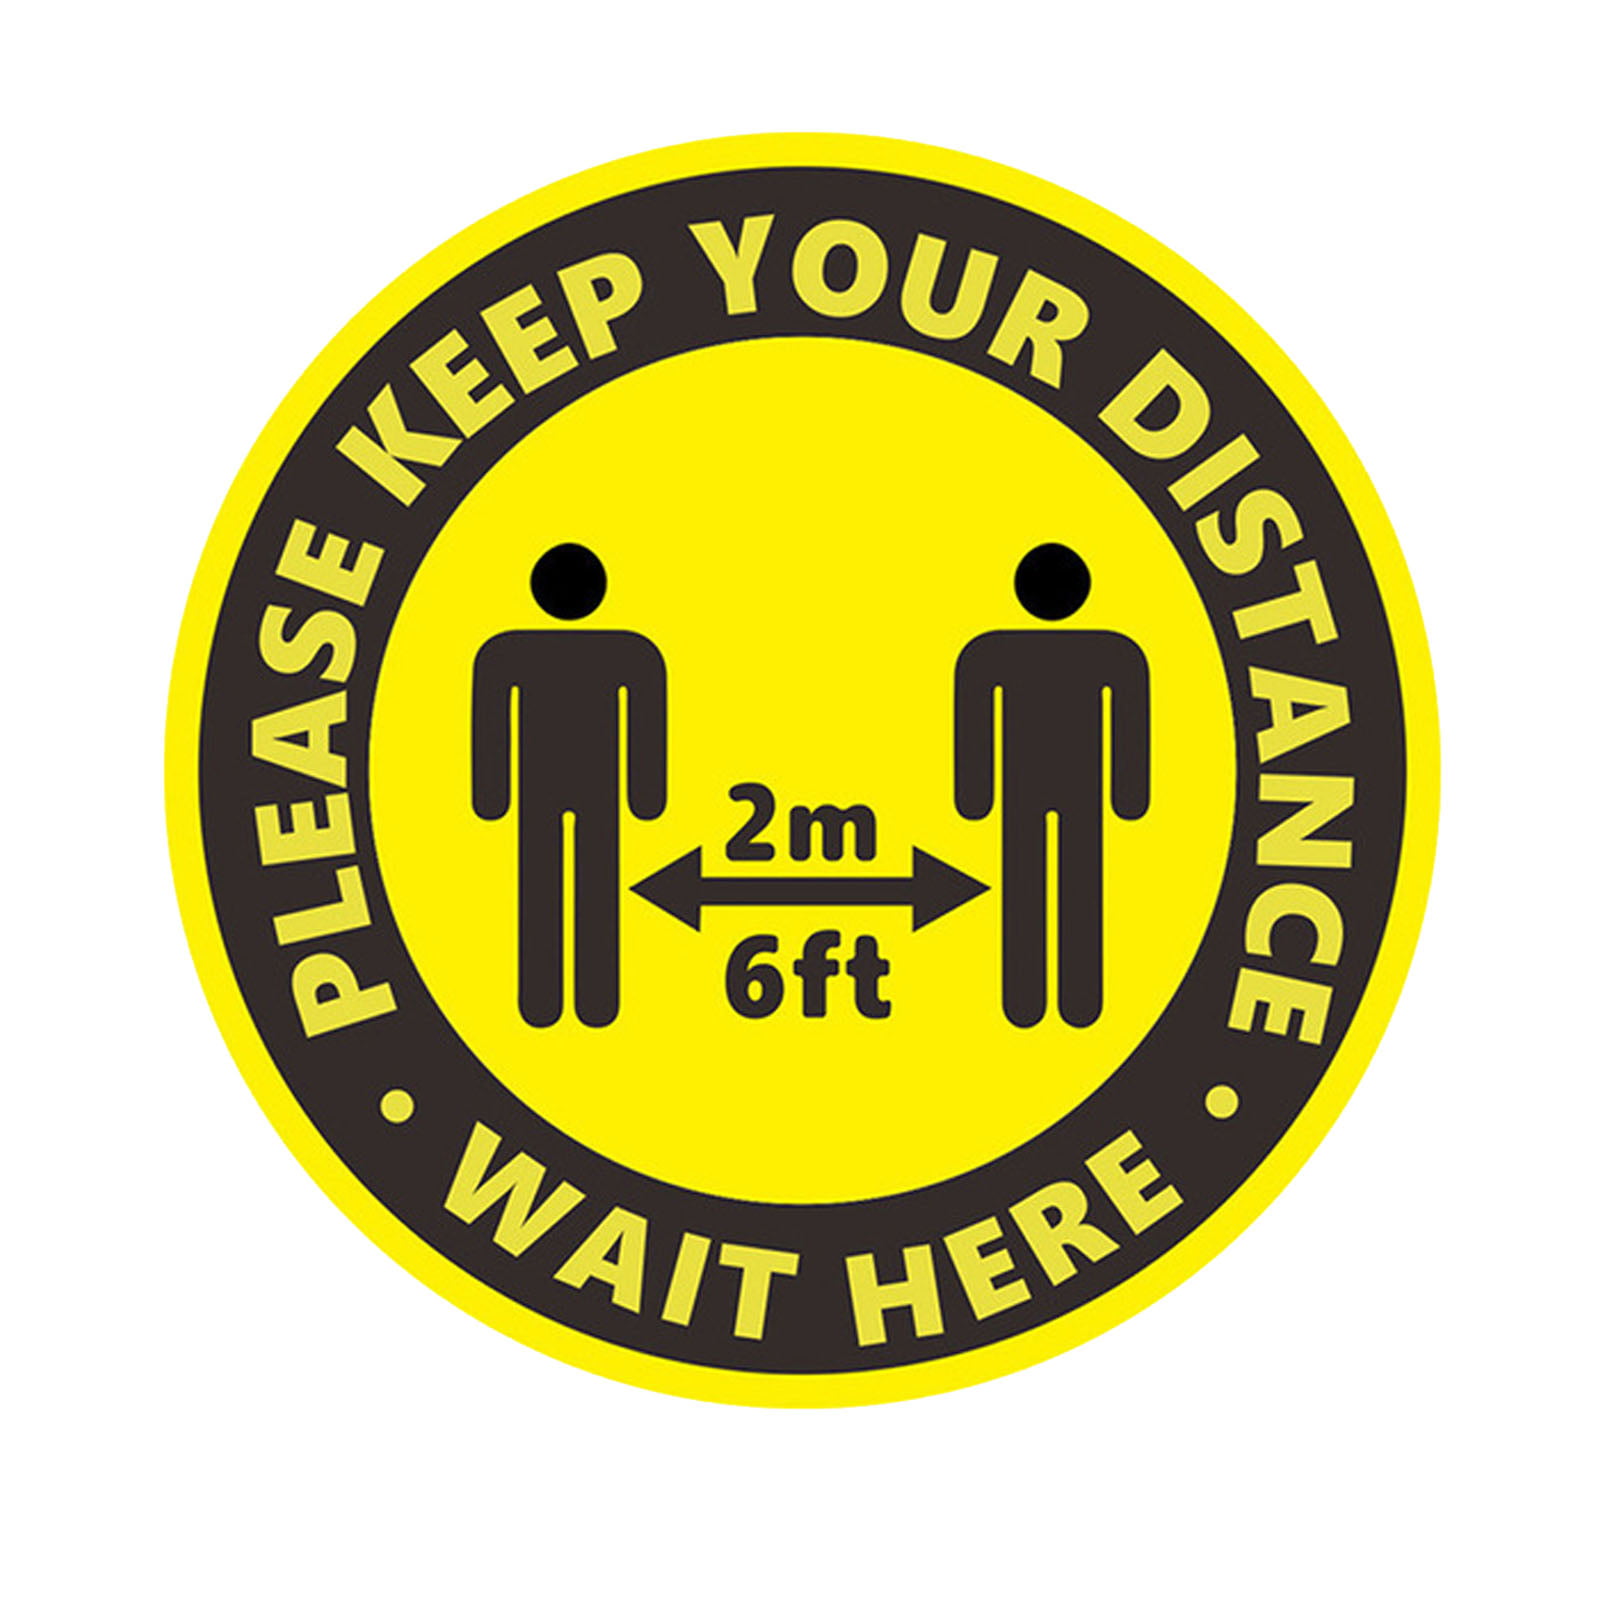 2M/6FT KEEP YOUR DISTANCE DECAL STICKER  SAFETY CAR SHOP WINDOW DOOR 